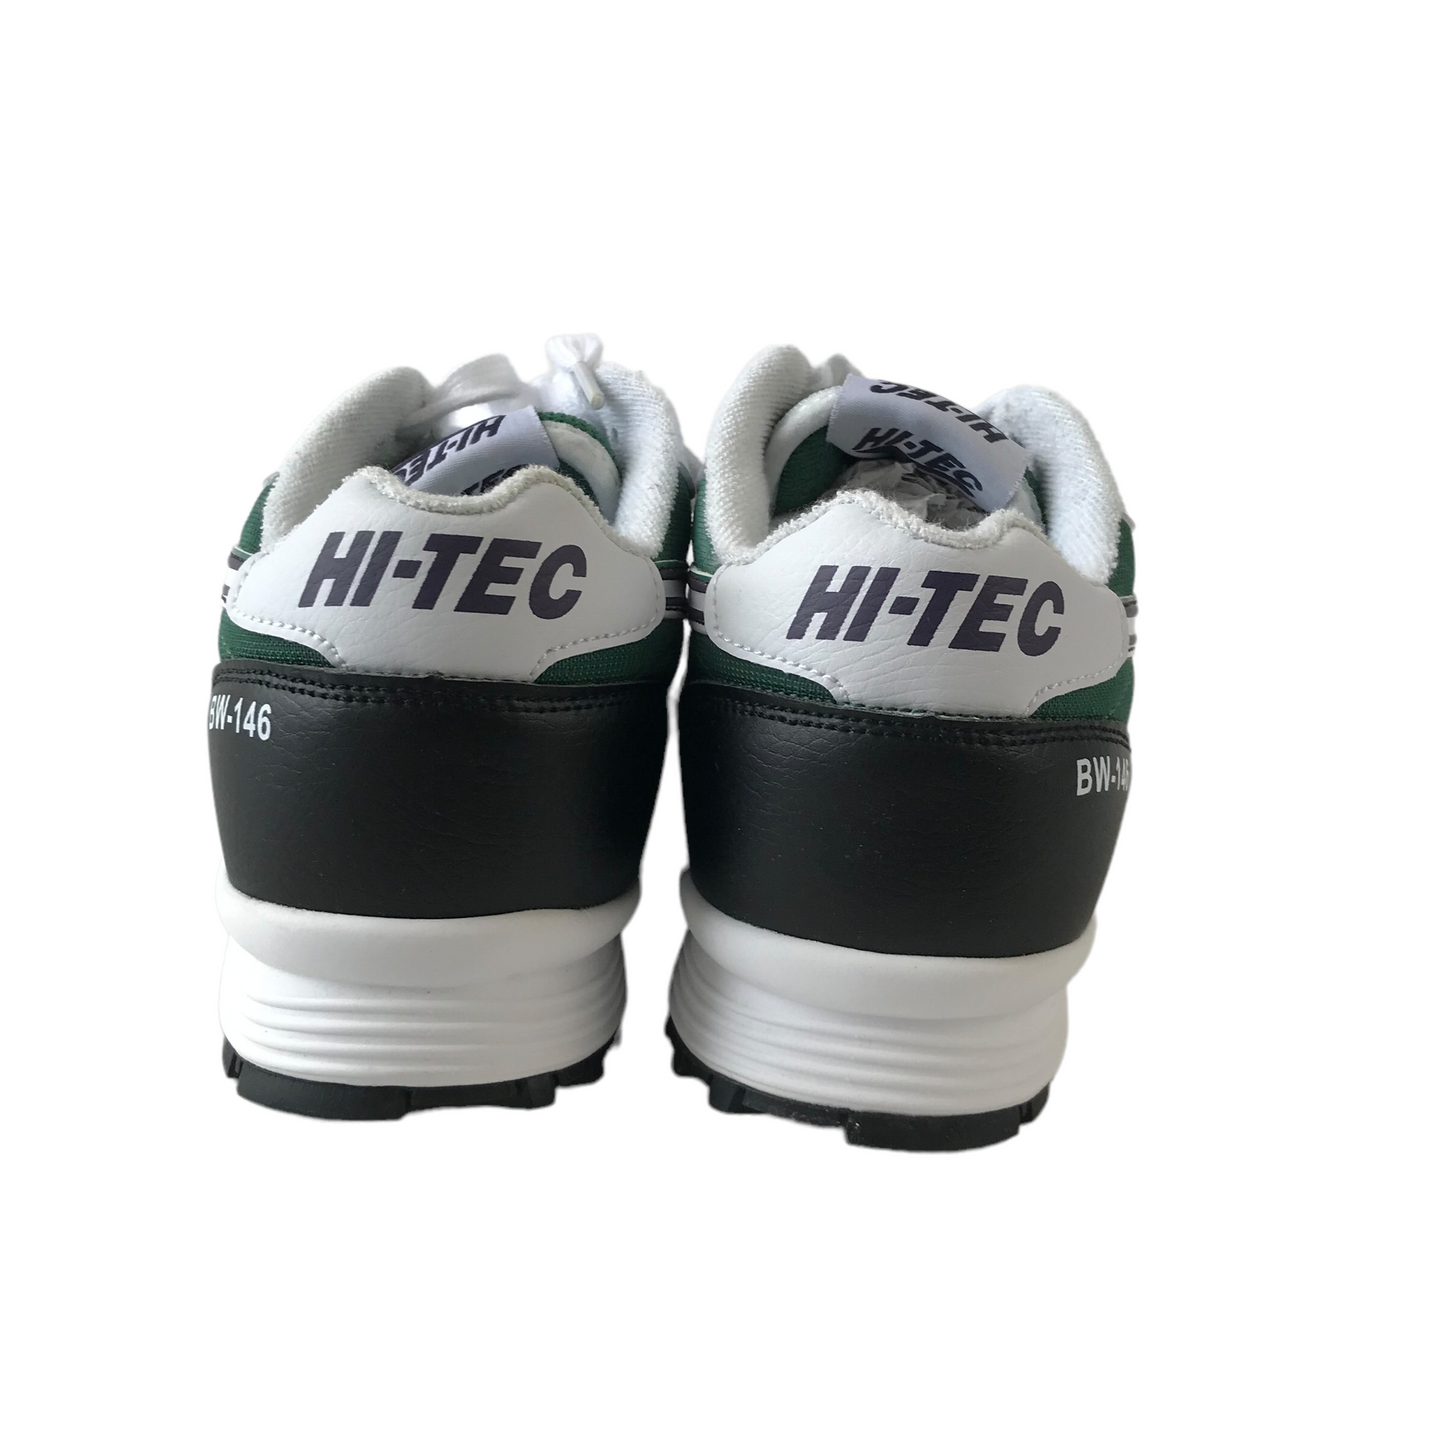 Hi-Tech BW-146 Green and White Trainers Size UK 7